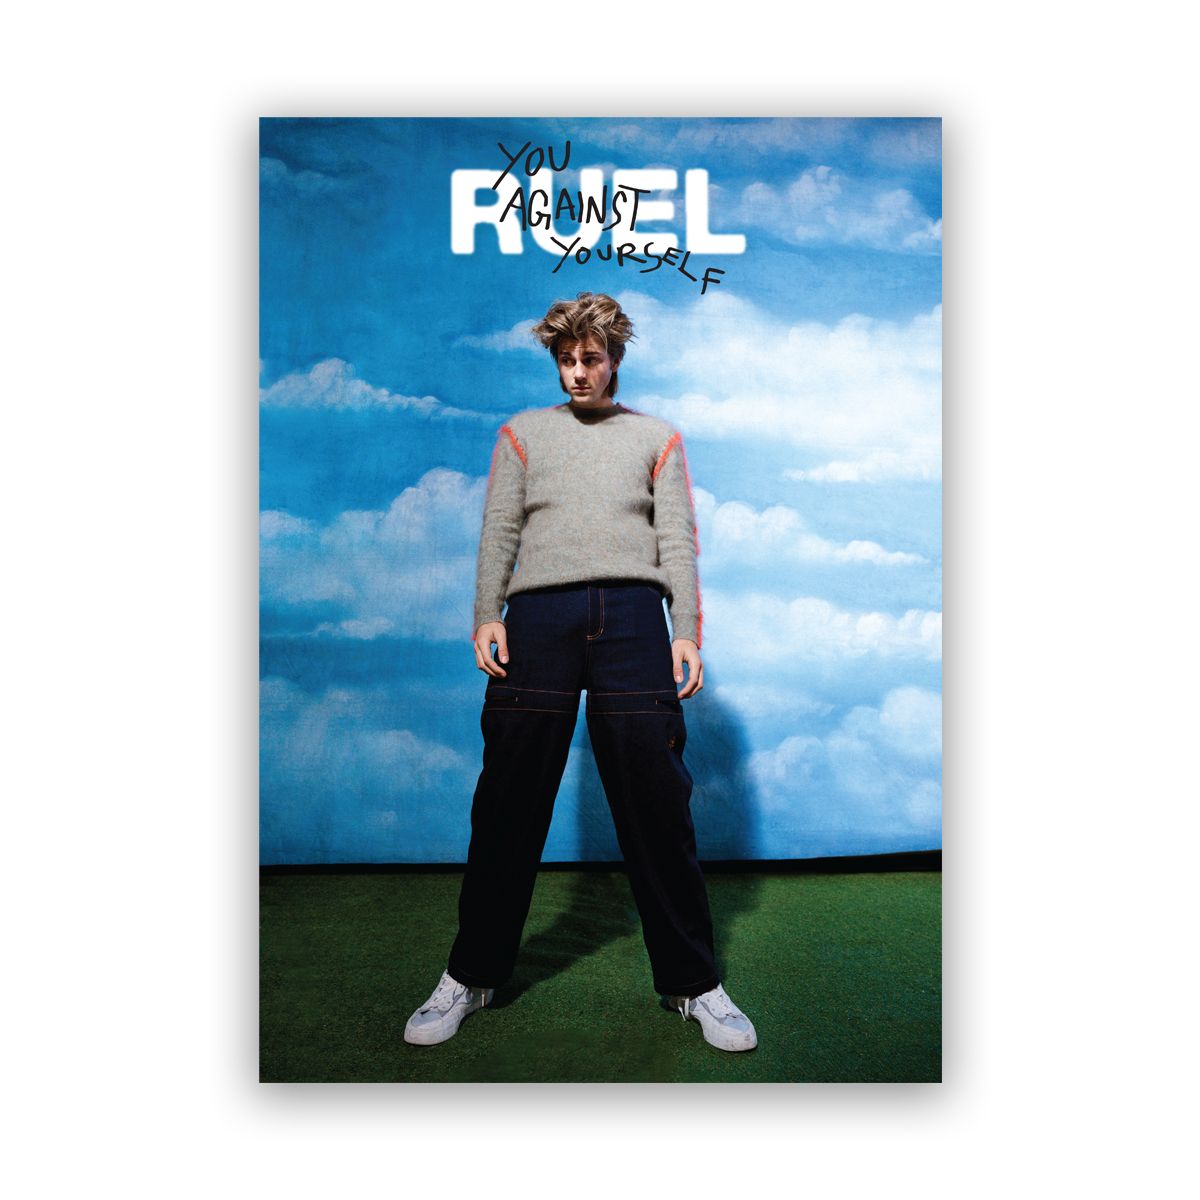 Poster of Ruel in jeans and grey sweater, against cloud background. With RUEL Logo and 'you against yourself' written in marker on top